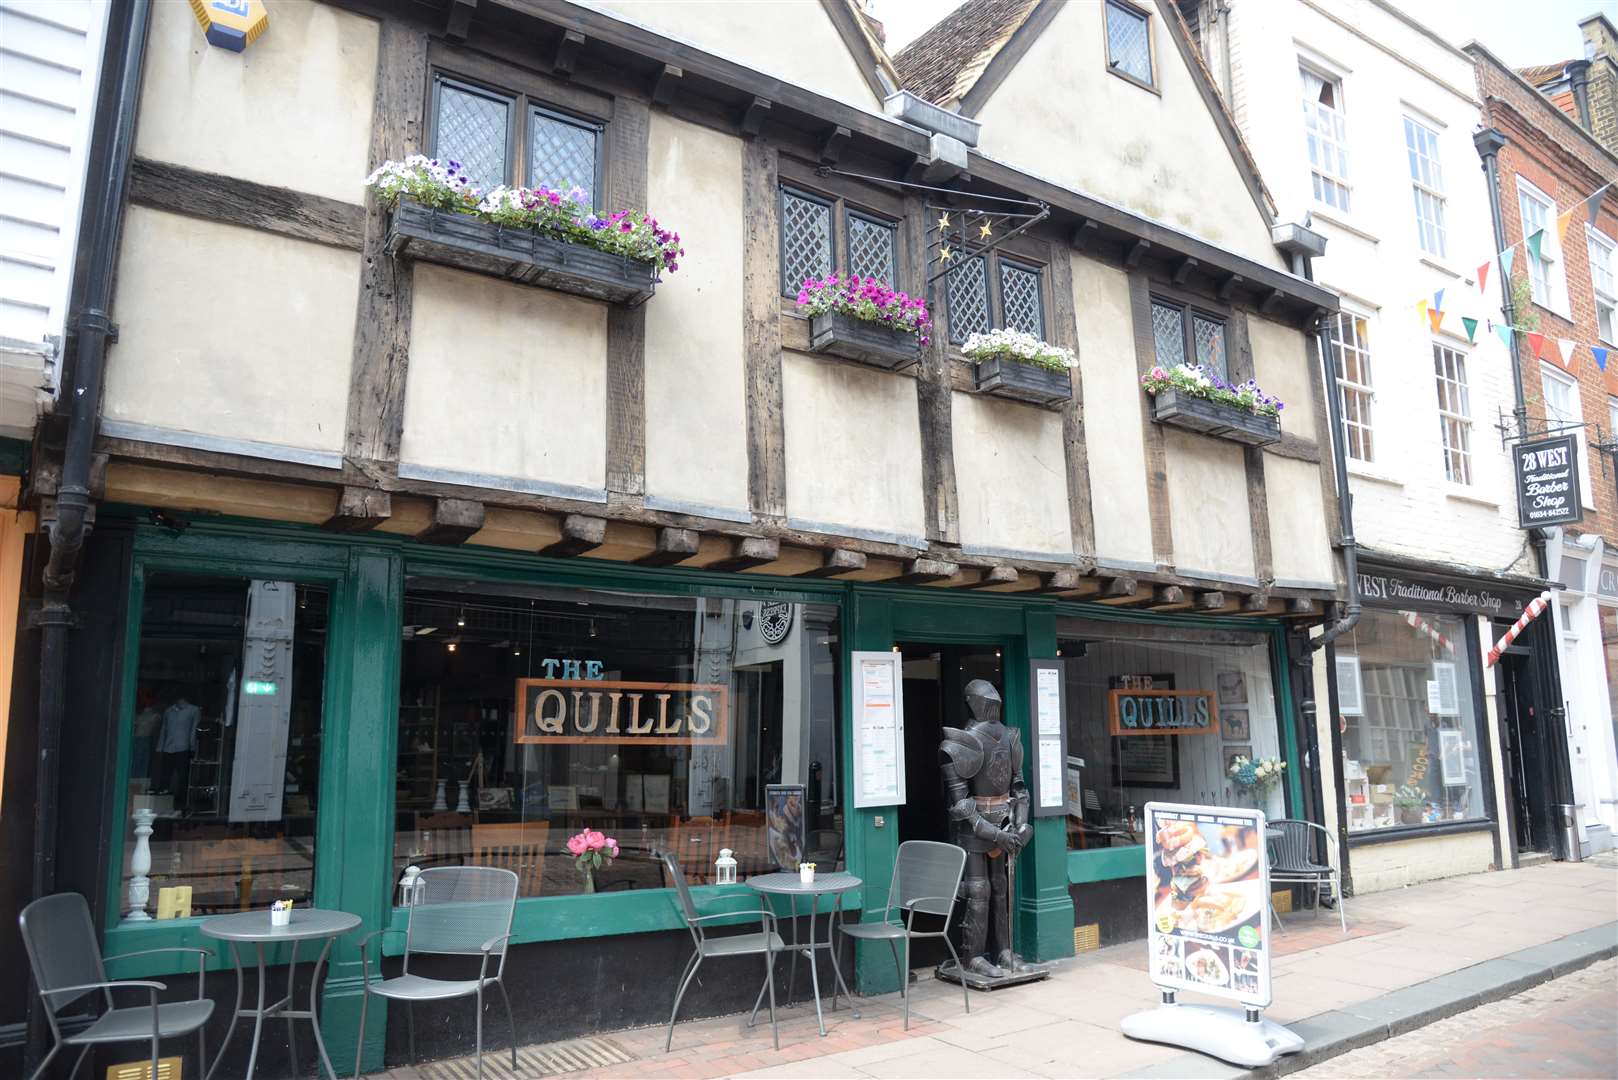 Head along to The Quills in Rochester High Street